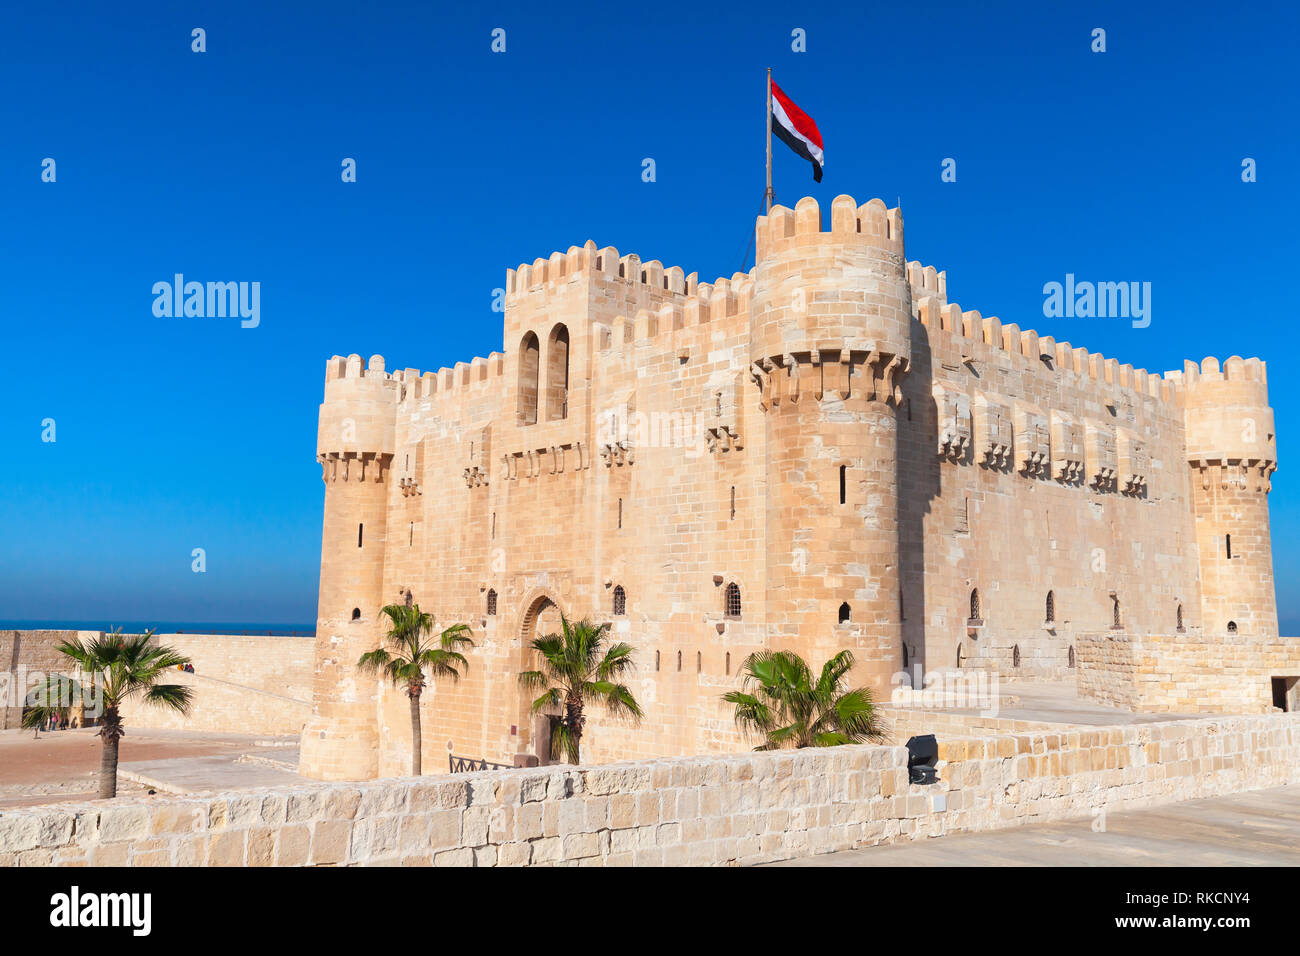 The Citadel of Qaitbay or the Fort of Qaitbay is a 15th-century defensive fortress located on the Mediterranean sea coast, Alexandria, Egypt. It was e Stock Photo